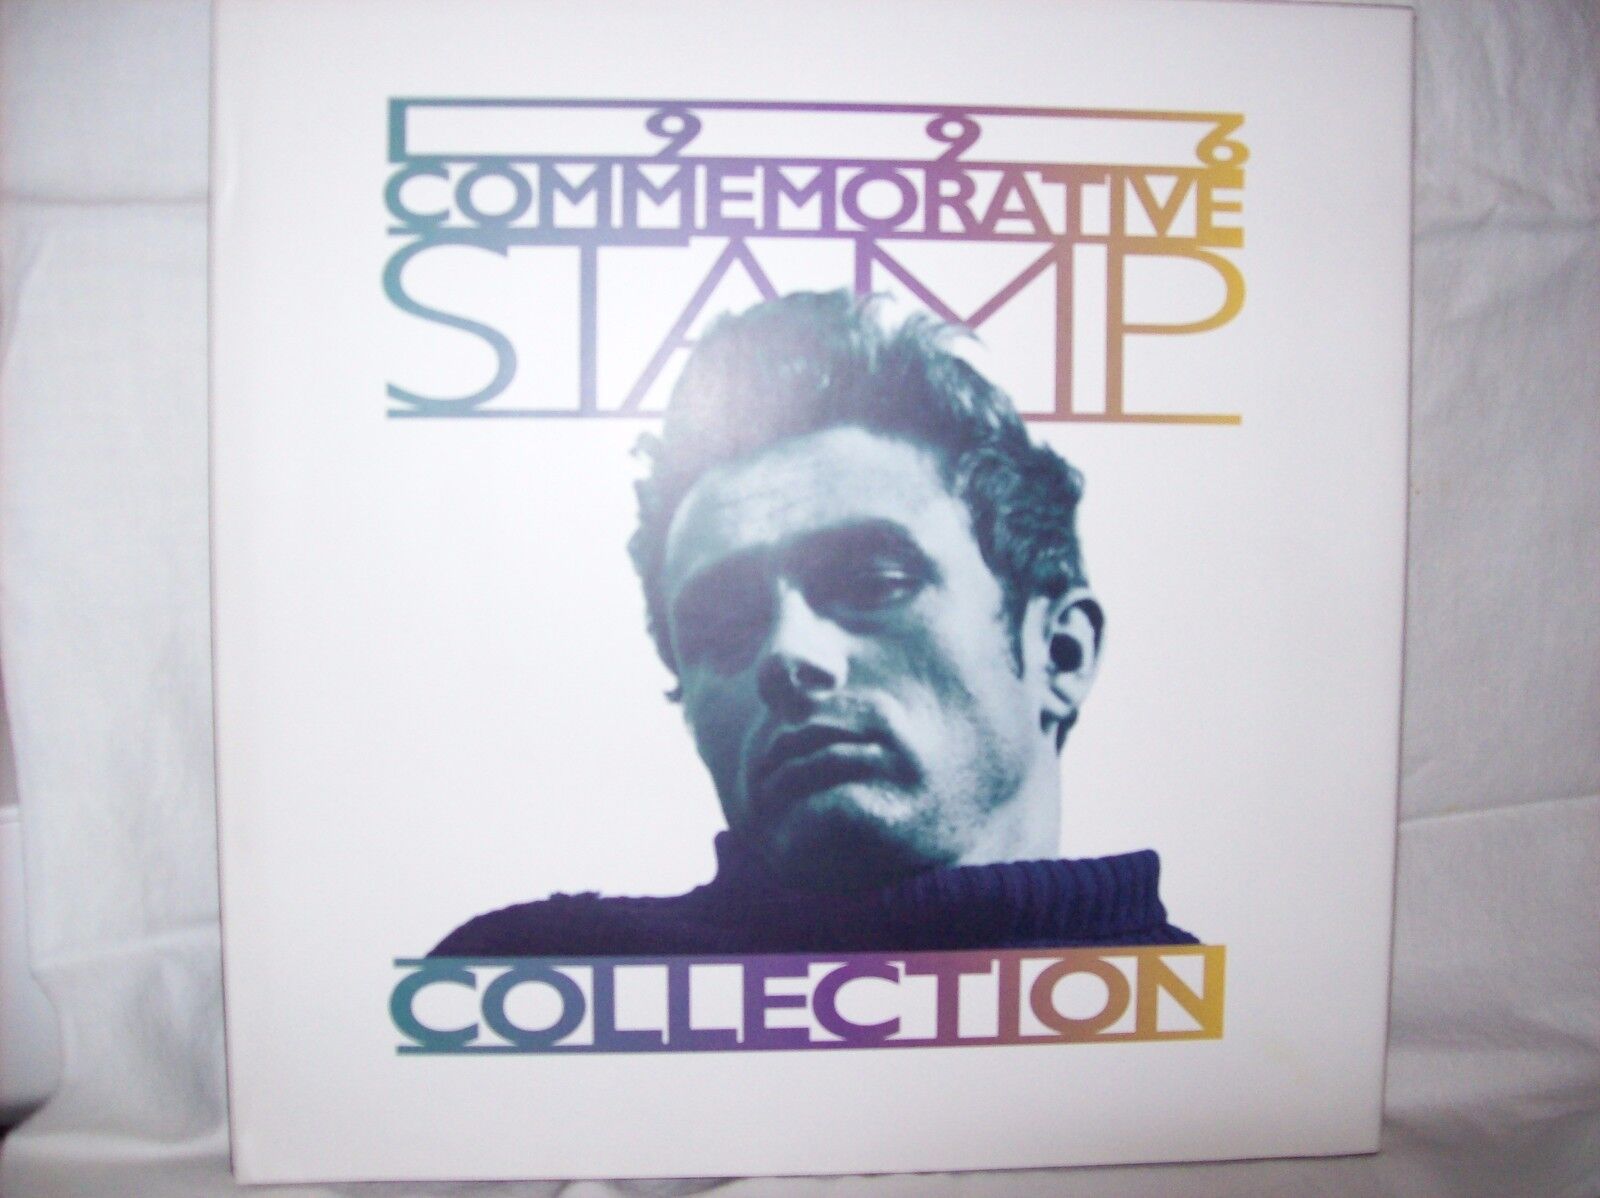 JAMES DEAN- USPS-Commemorative Stamp Collection stamps cent 32 Rapid rise New products, world's highest quality popular! 1996 Excellent